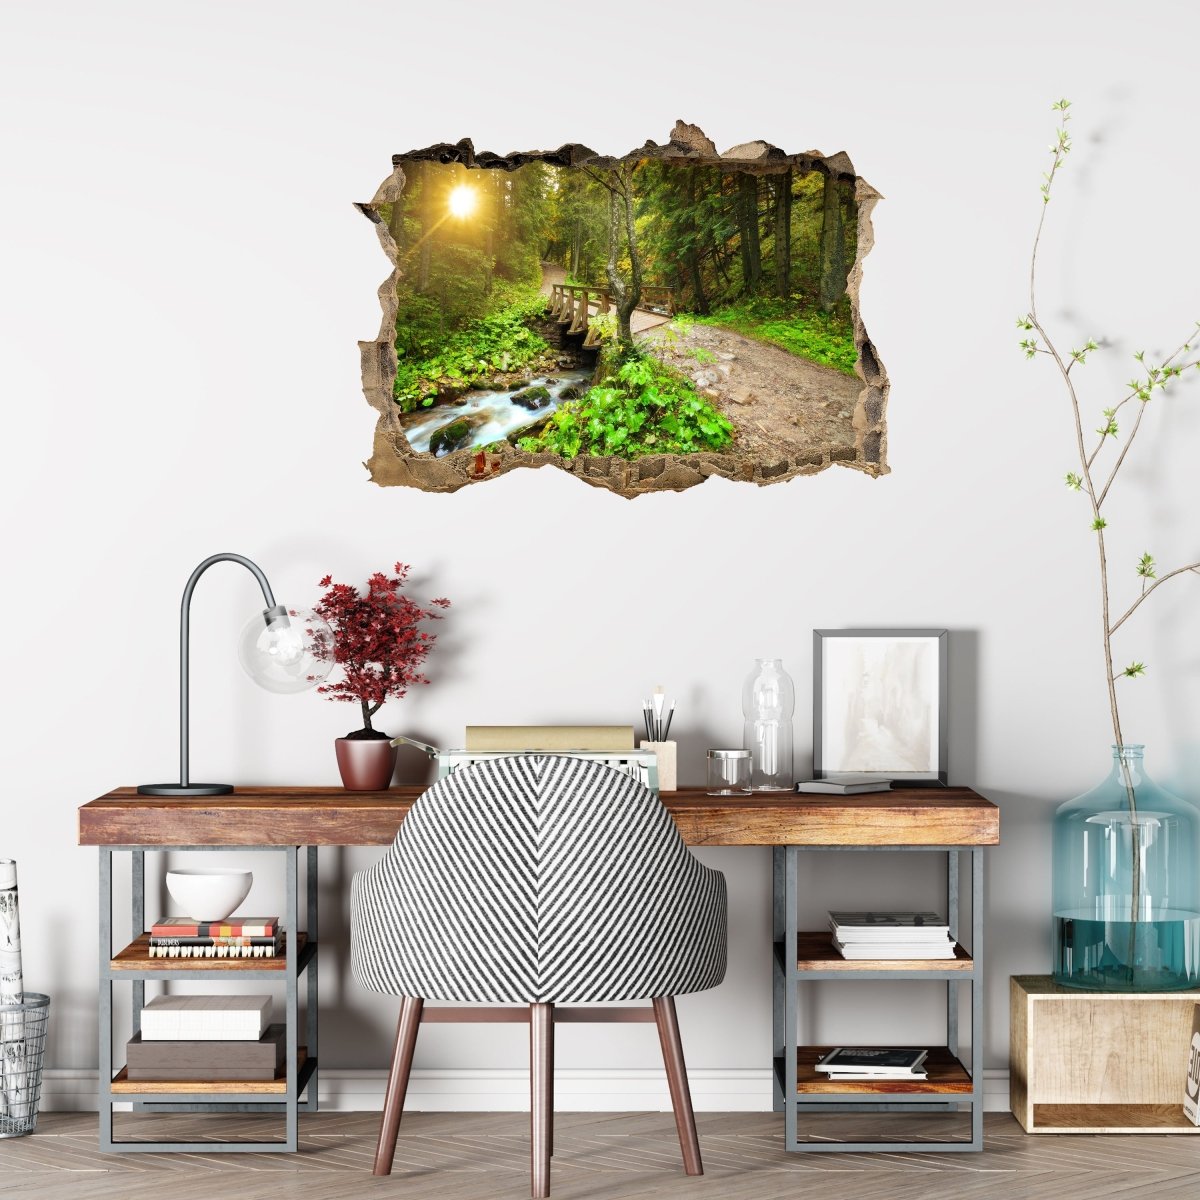 3D wall sticker forest path with stream - Wall Tattoo M0397